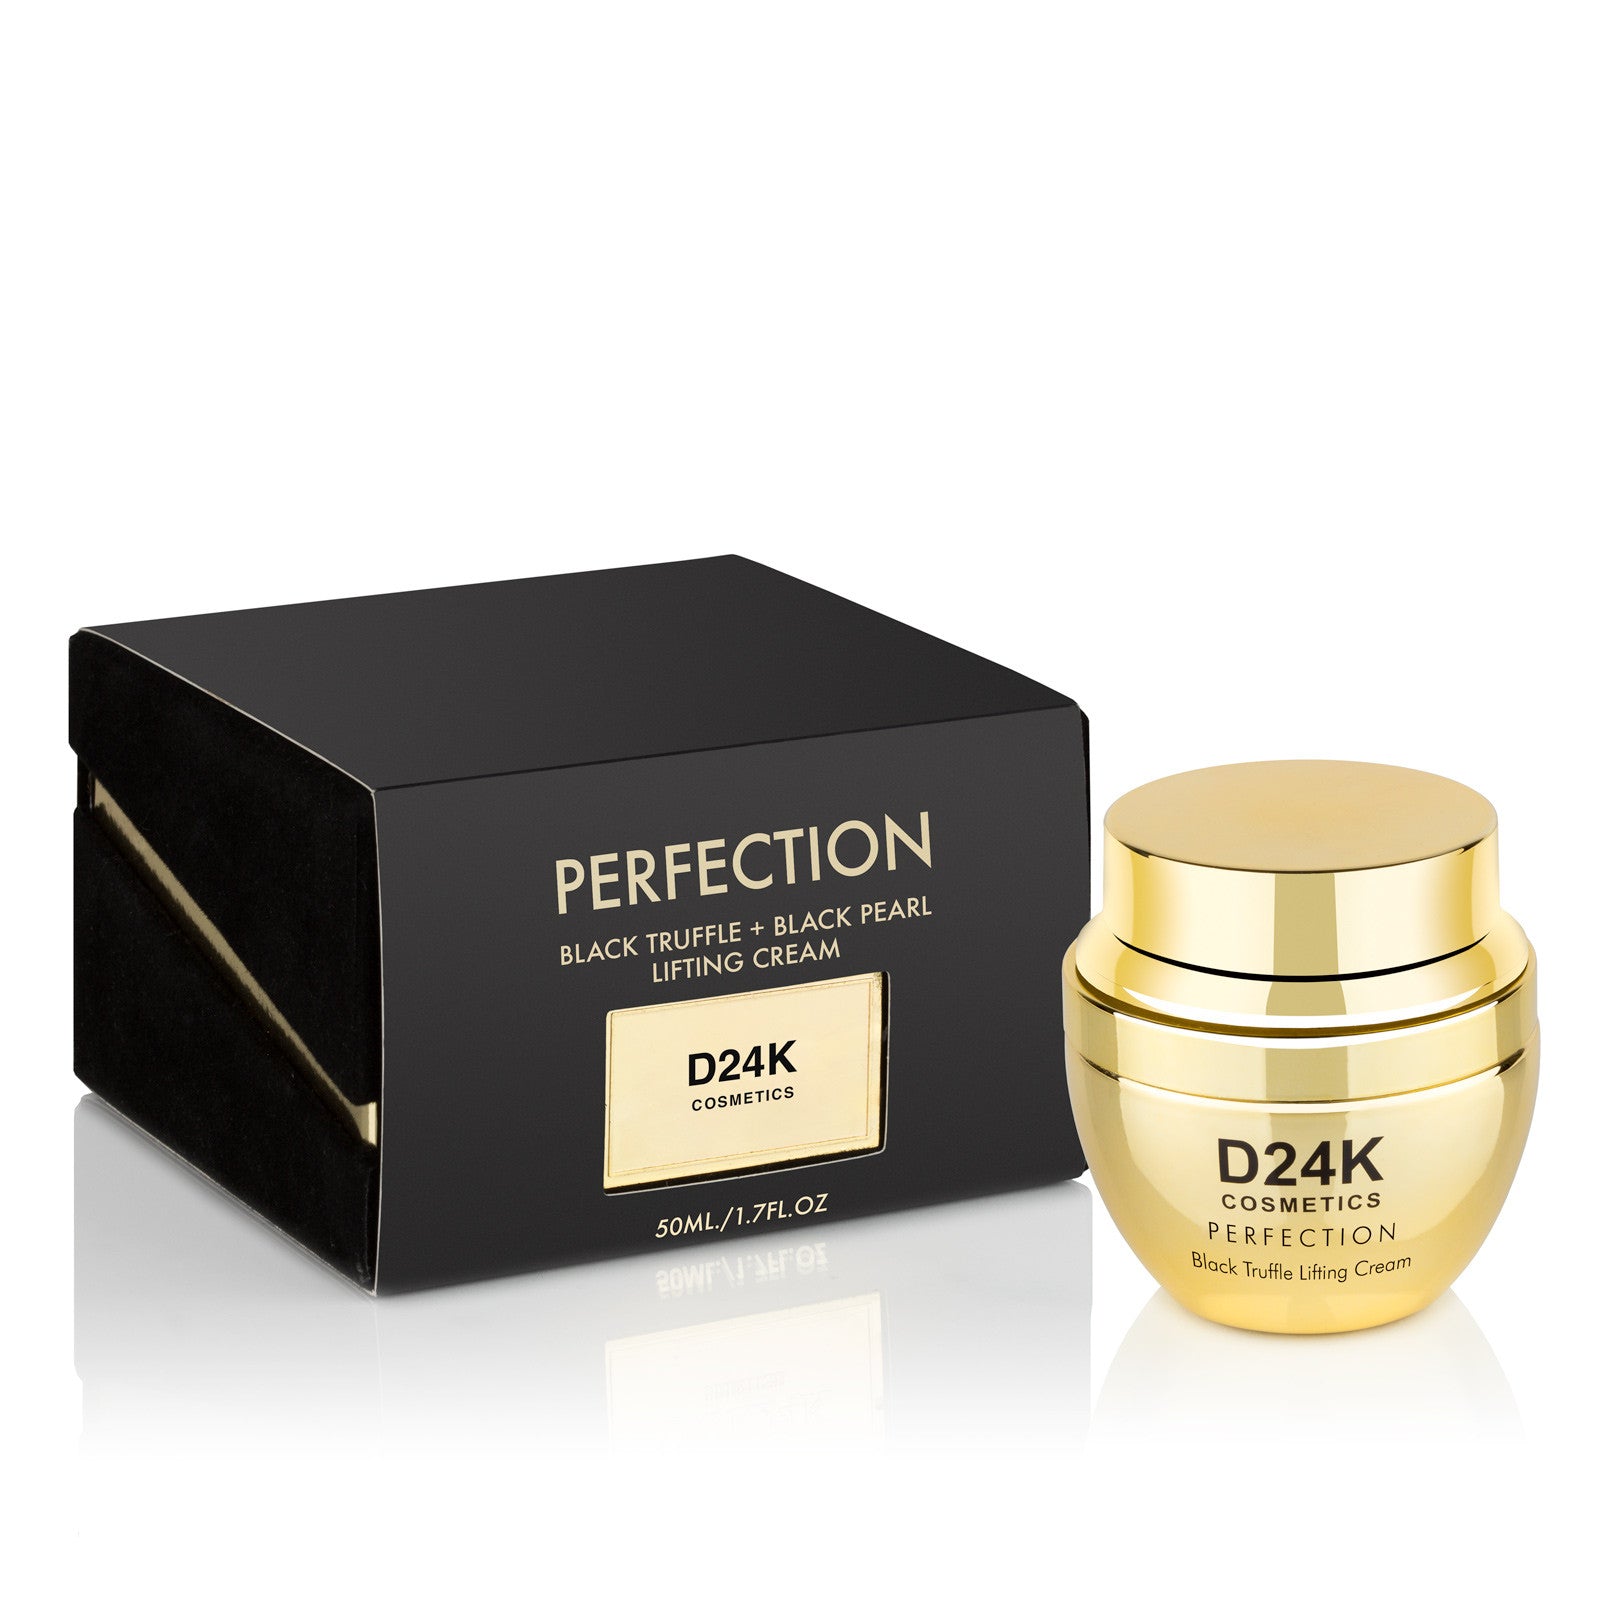 Perfection Lifting Cream with Black Truffle & Black Pearl